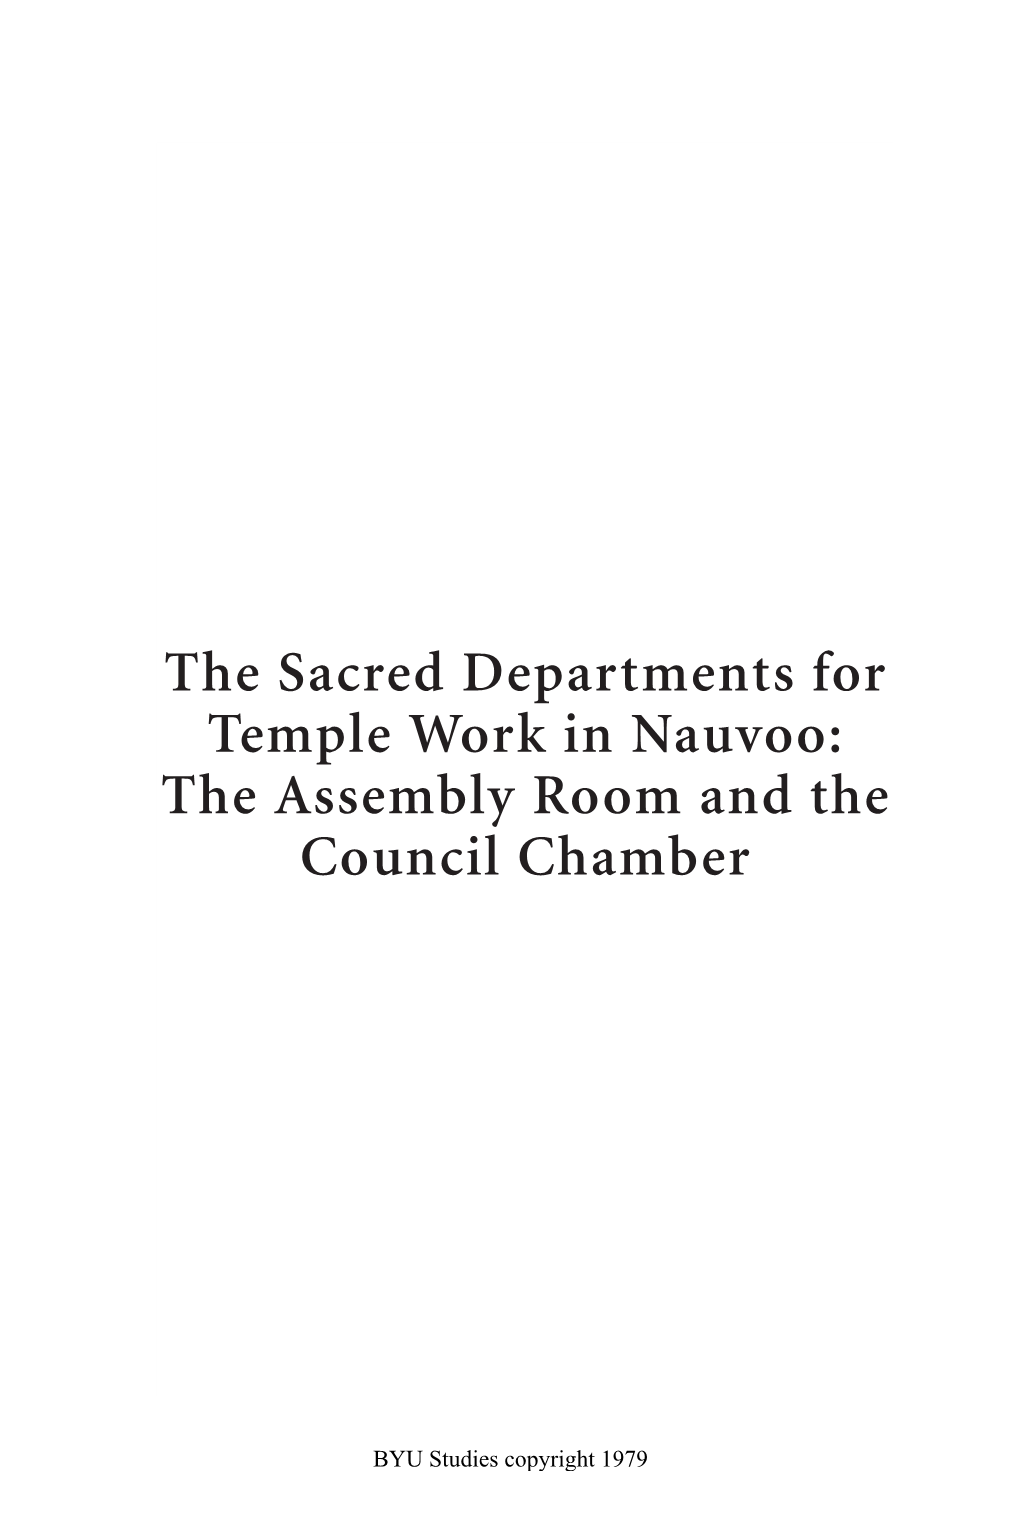 The Sacred Departments for Temple Work in Nauvoo: the Assembly Room and the Council Chamber